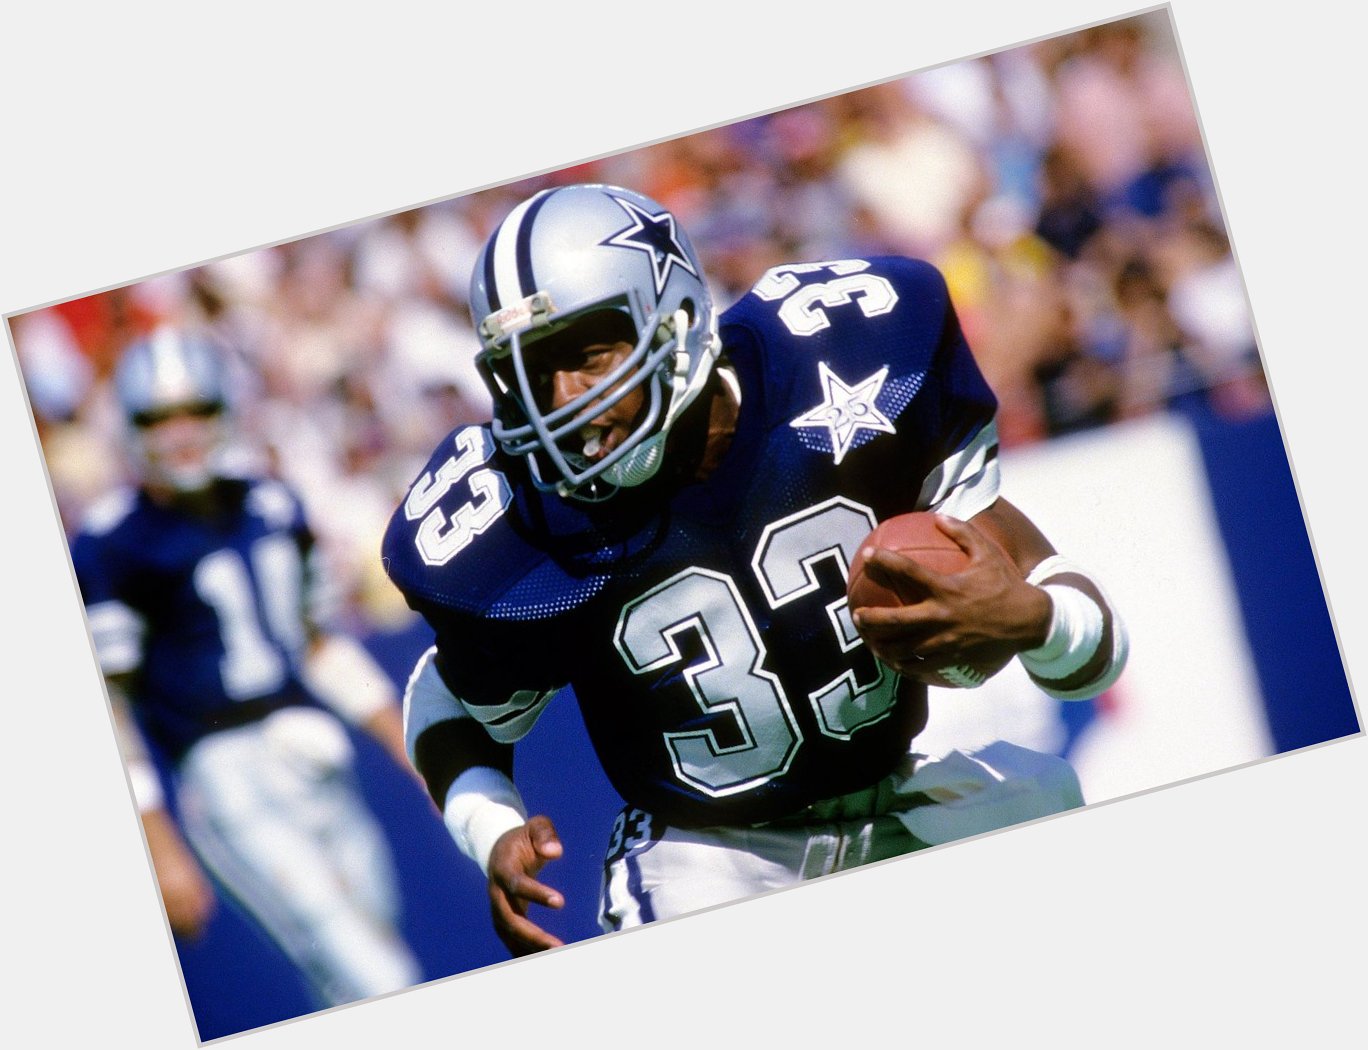 Happy birthday to Cowboys Hall of Fame running back 